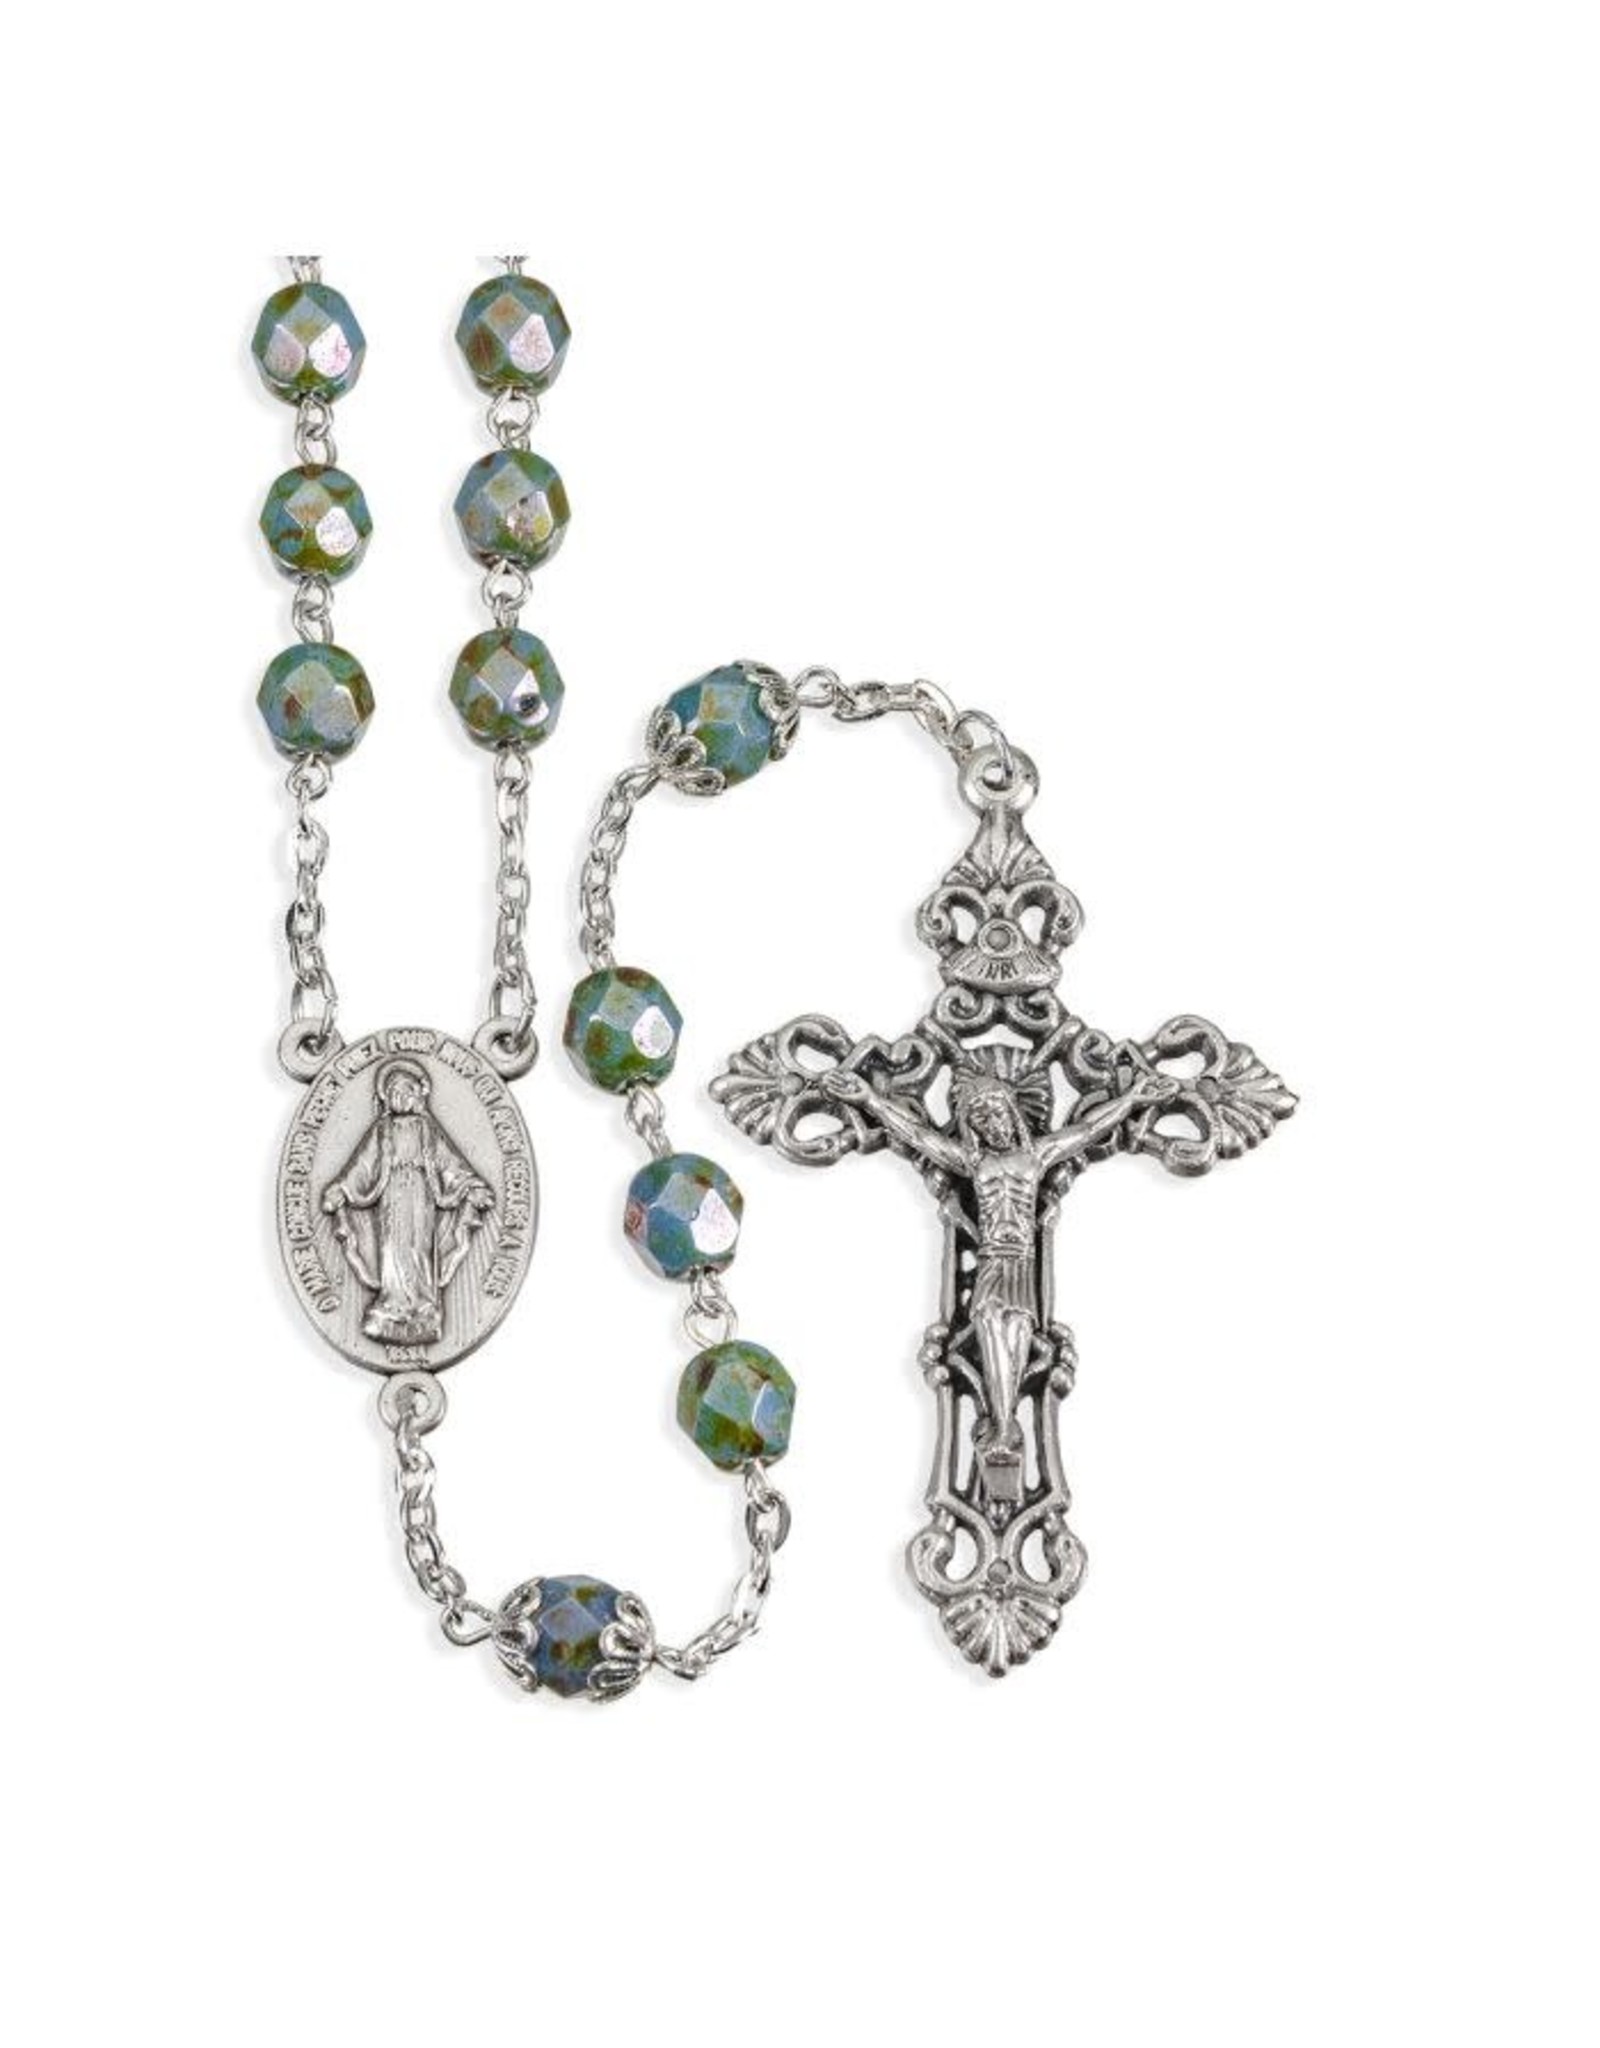 Hirten Rosary - Teal Glass Beads with Alabaster Luster